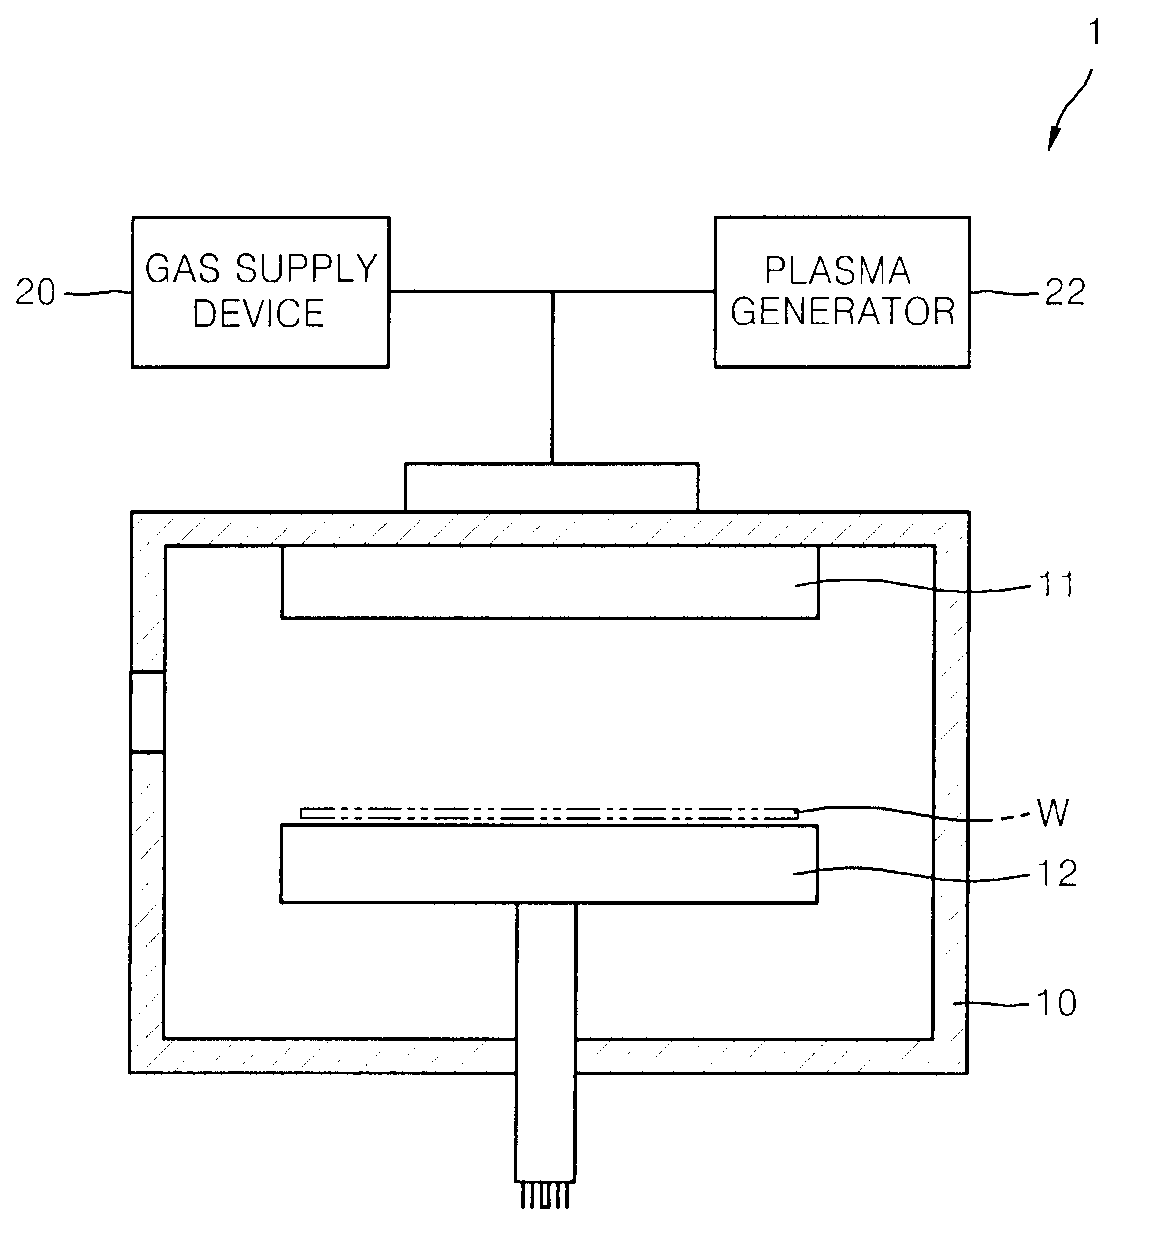 Cleaning method of apparatus for depositing carbon containing film